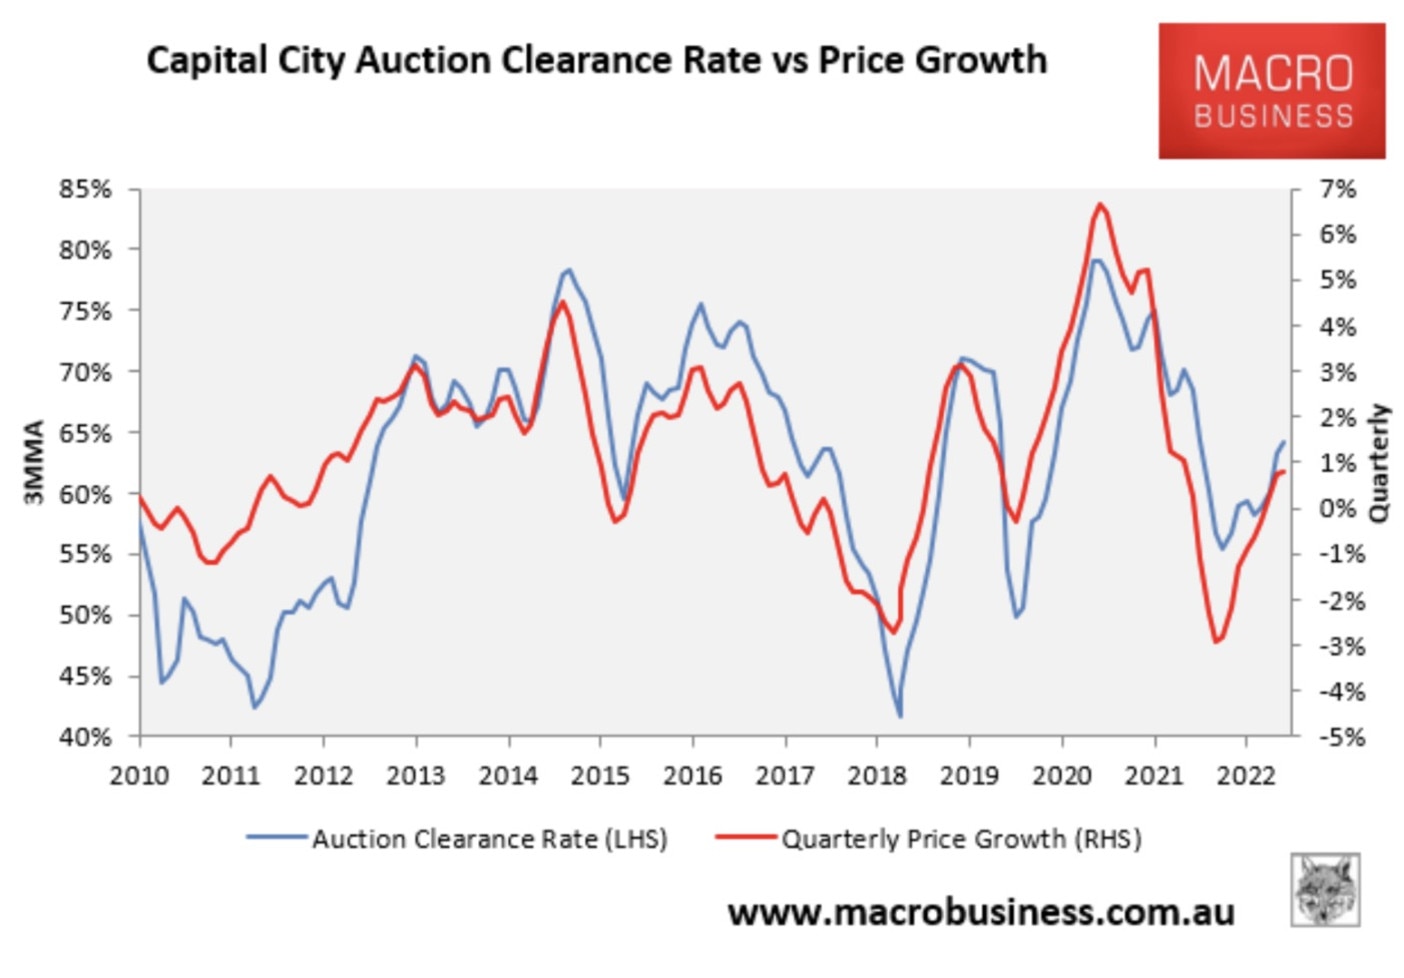 The unexpected rebound in home prices has been matched by the auction market.